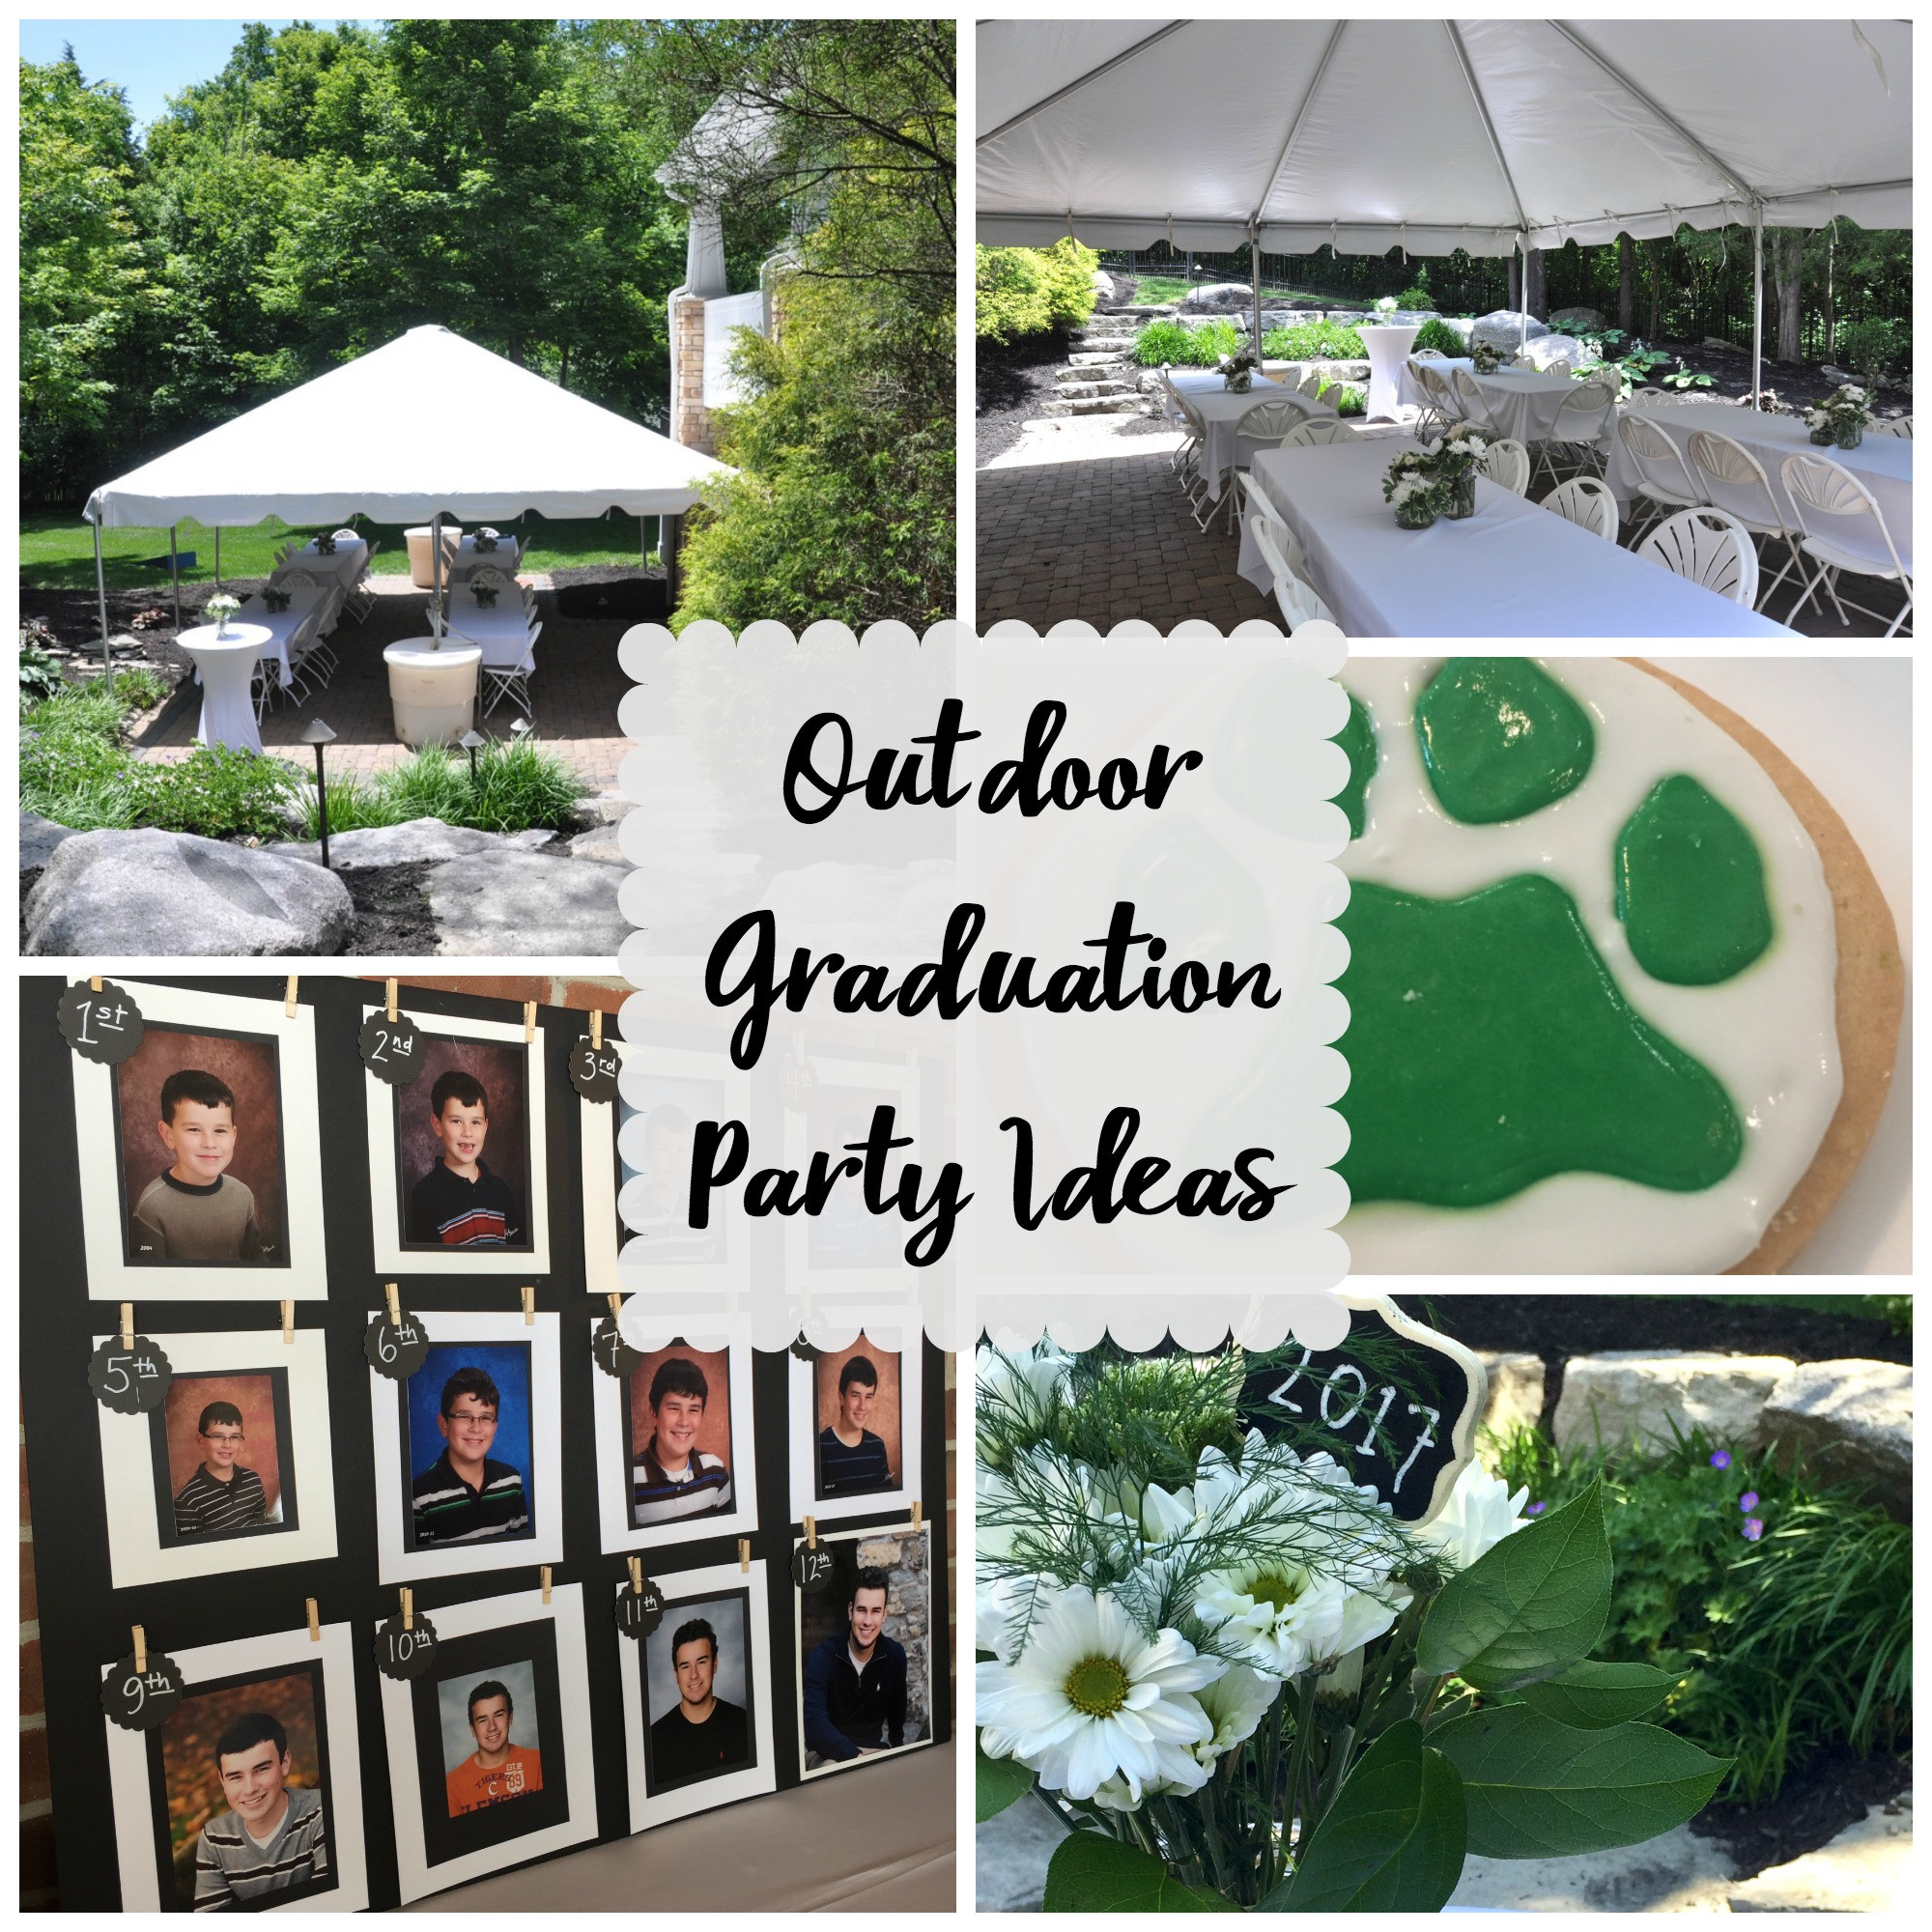 High School Graduation Party Planning Ideas
 Outdoor Graduation Party Evolution of Style